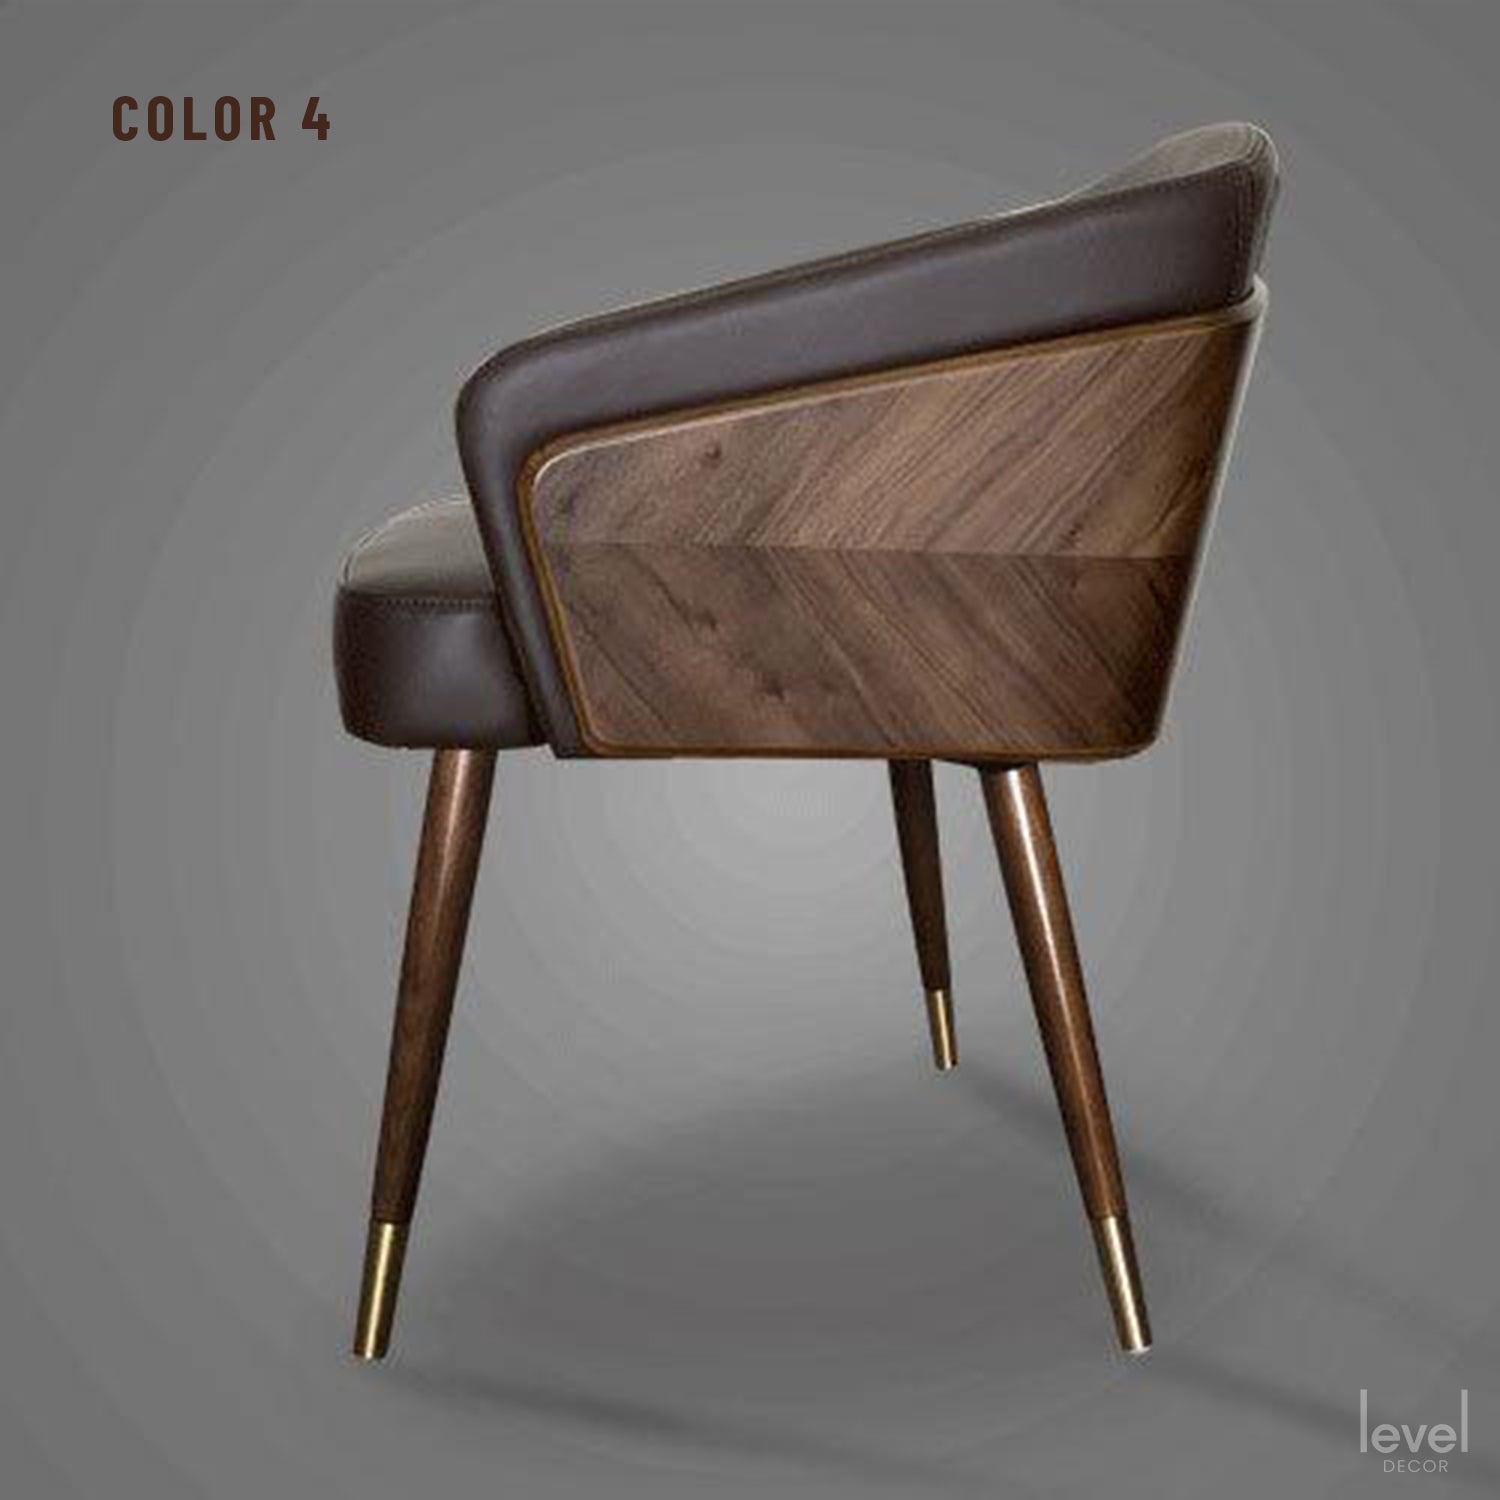 Modern Solid Wood Leisure Chairs - Color 4 - Level Decor